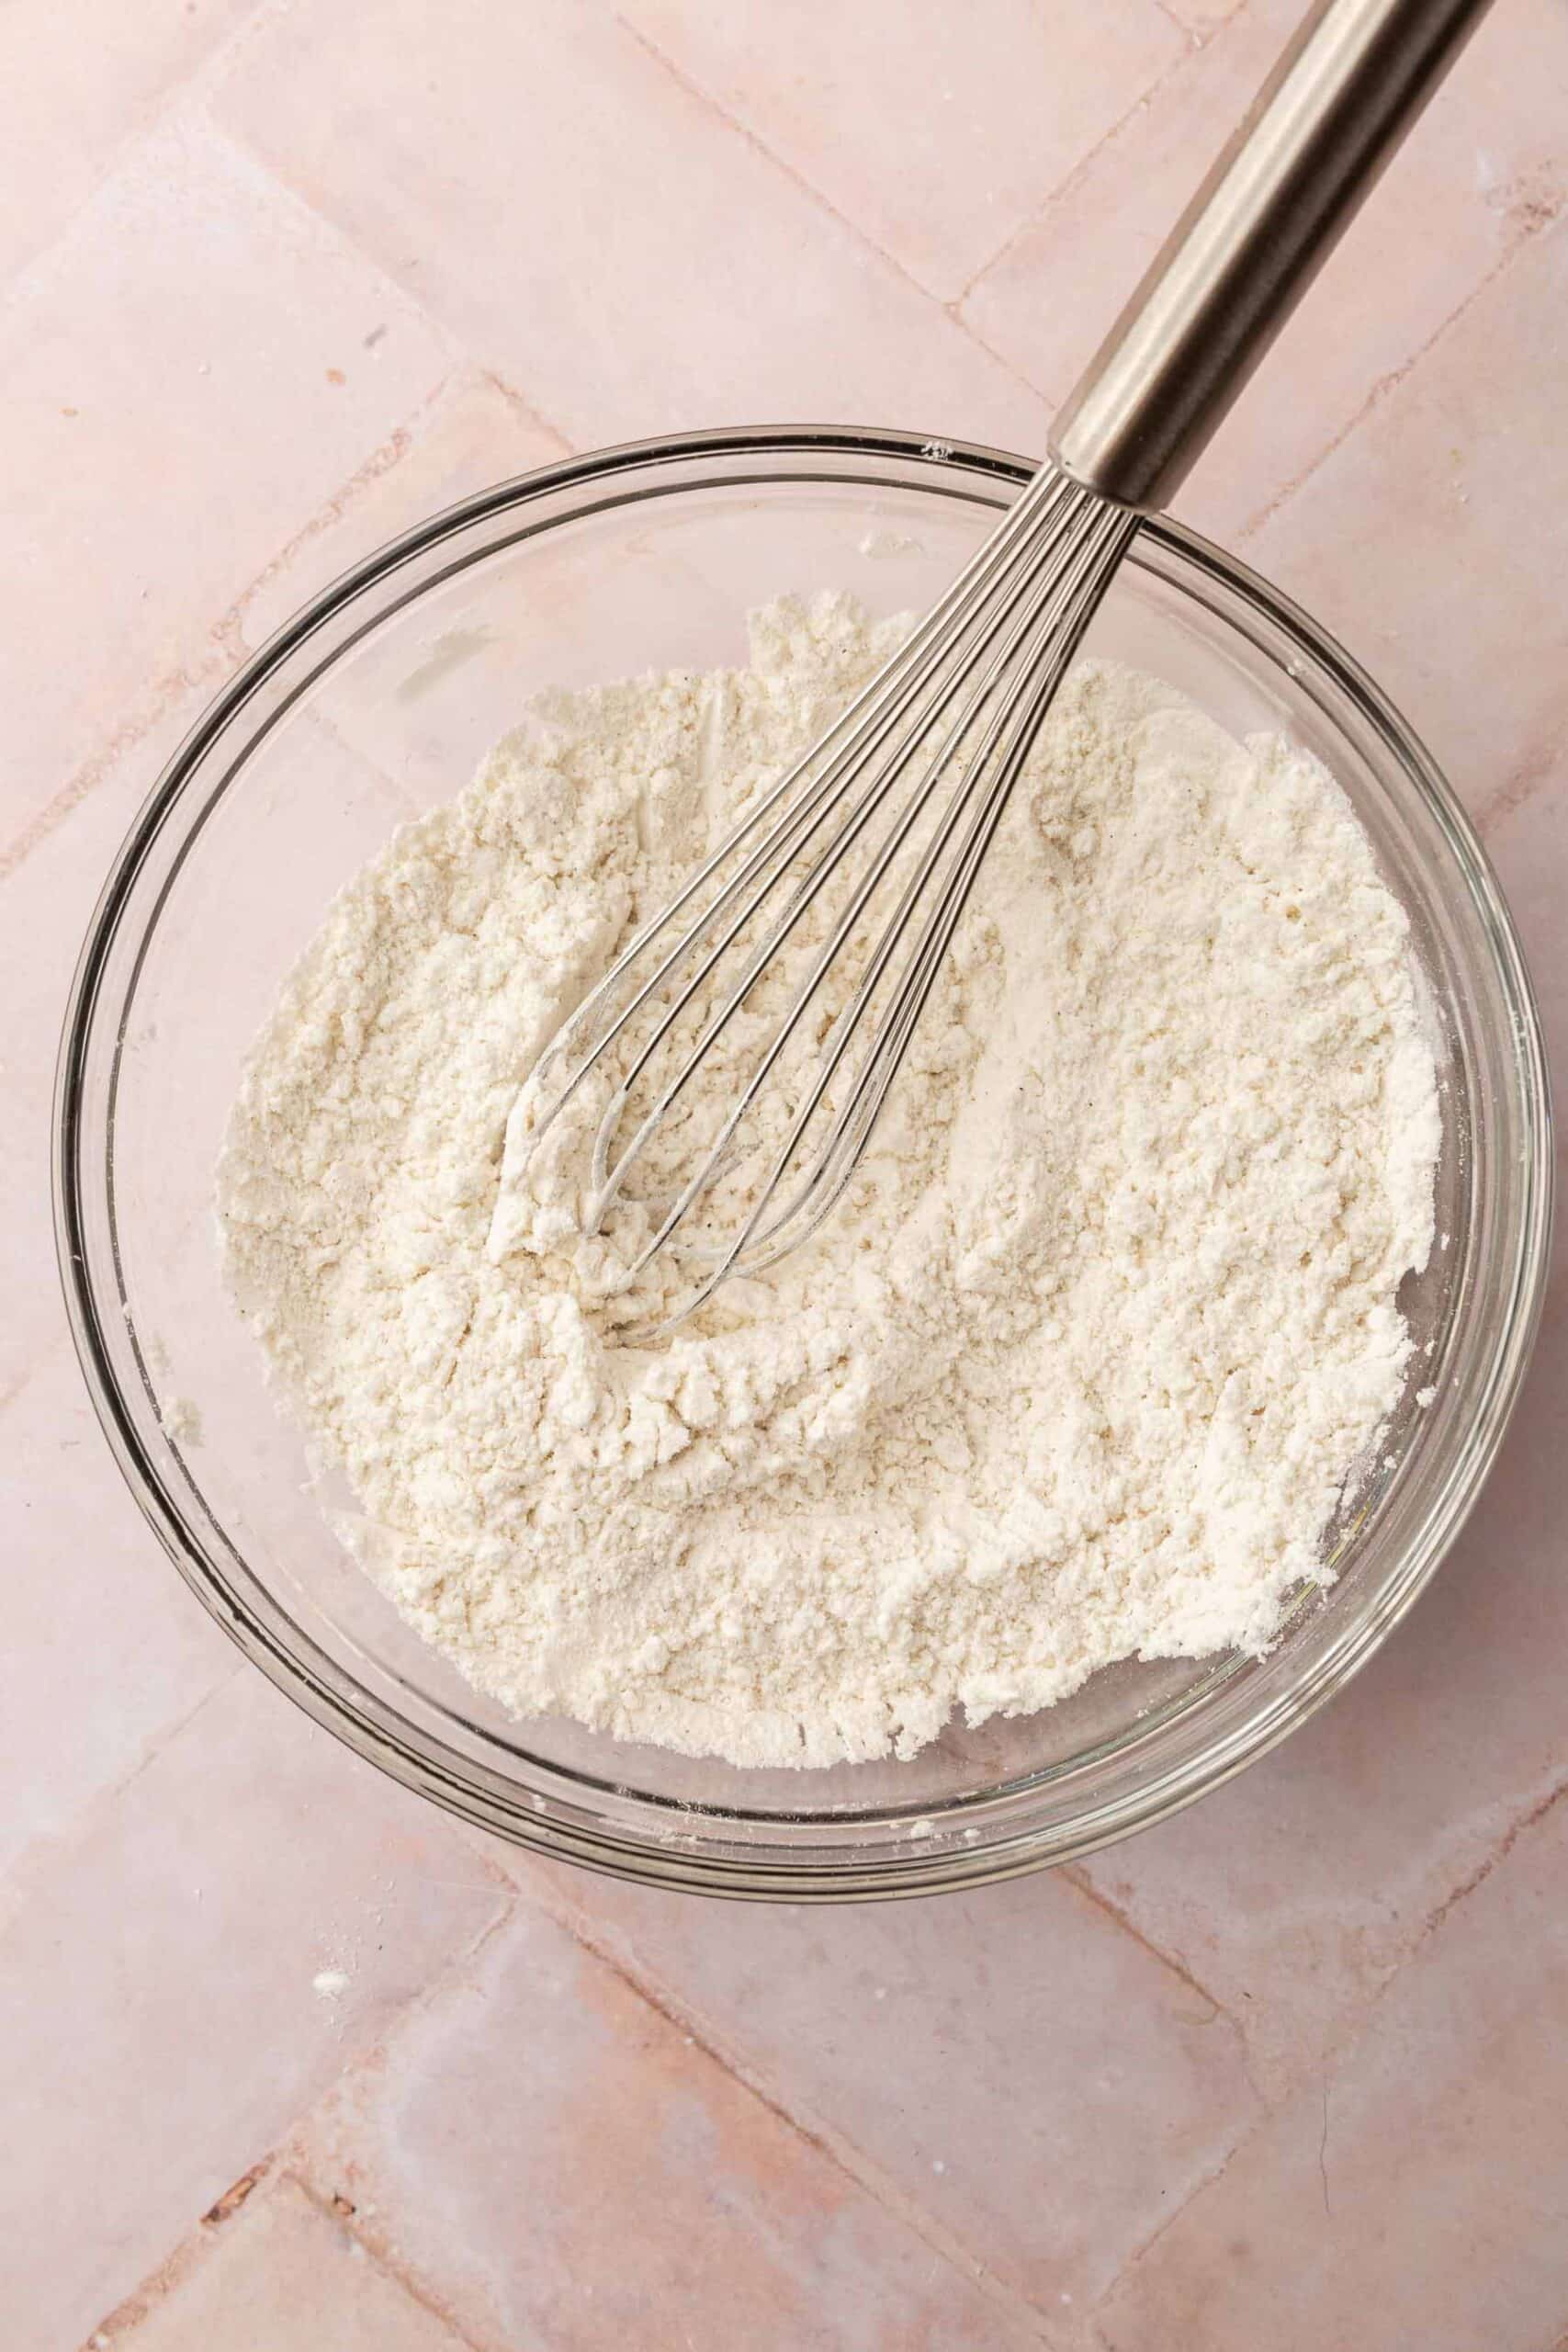 A glass mixing bowl with gluten-free flour, cornstarch and salt in it with a metal wire whisk.